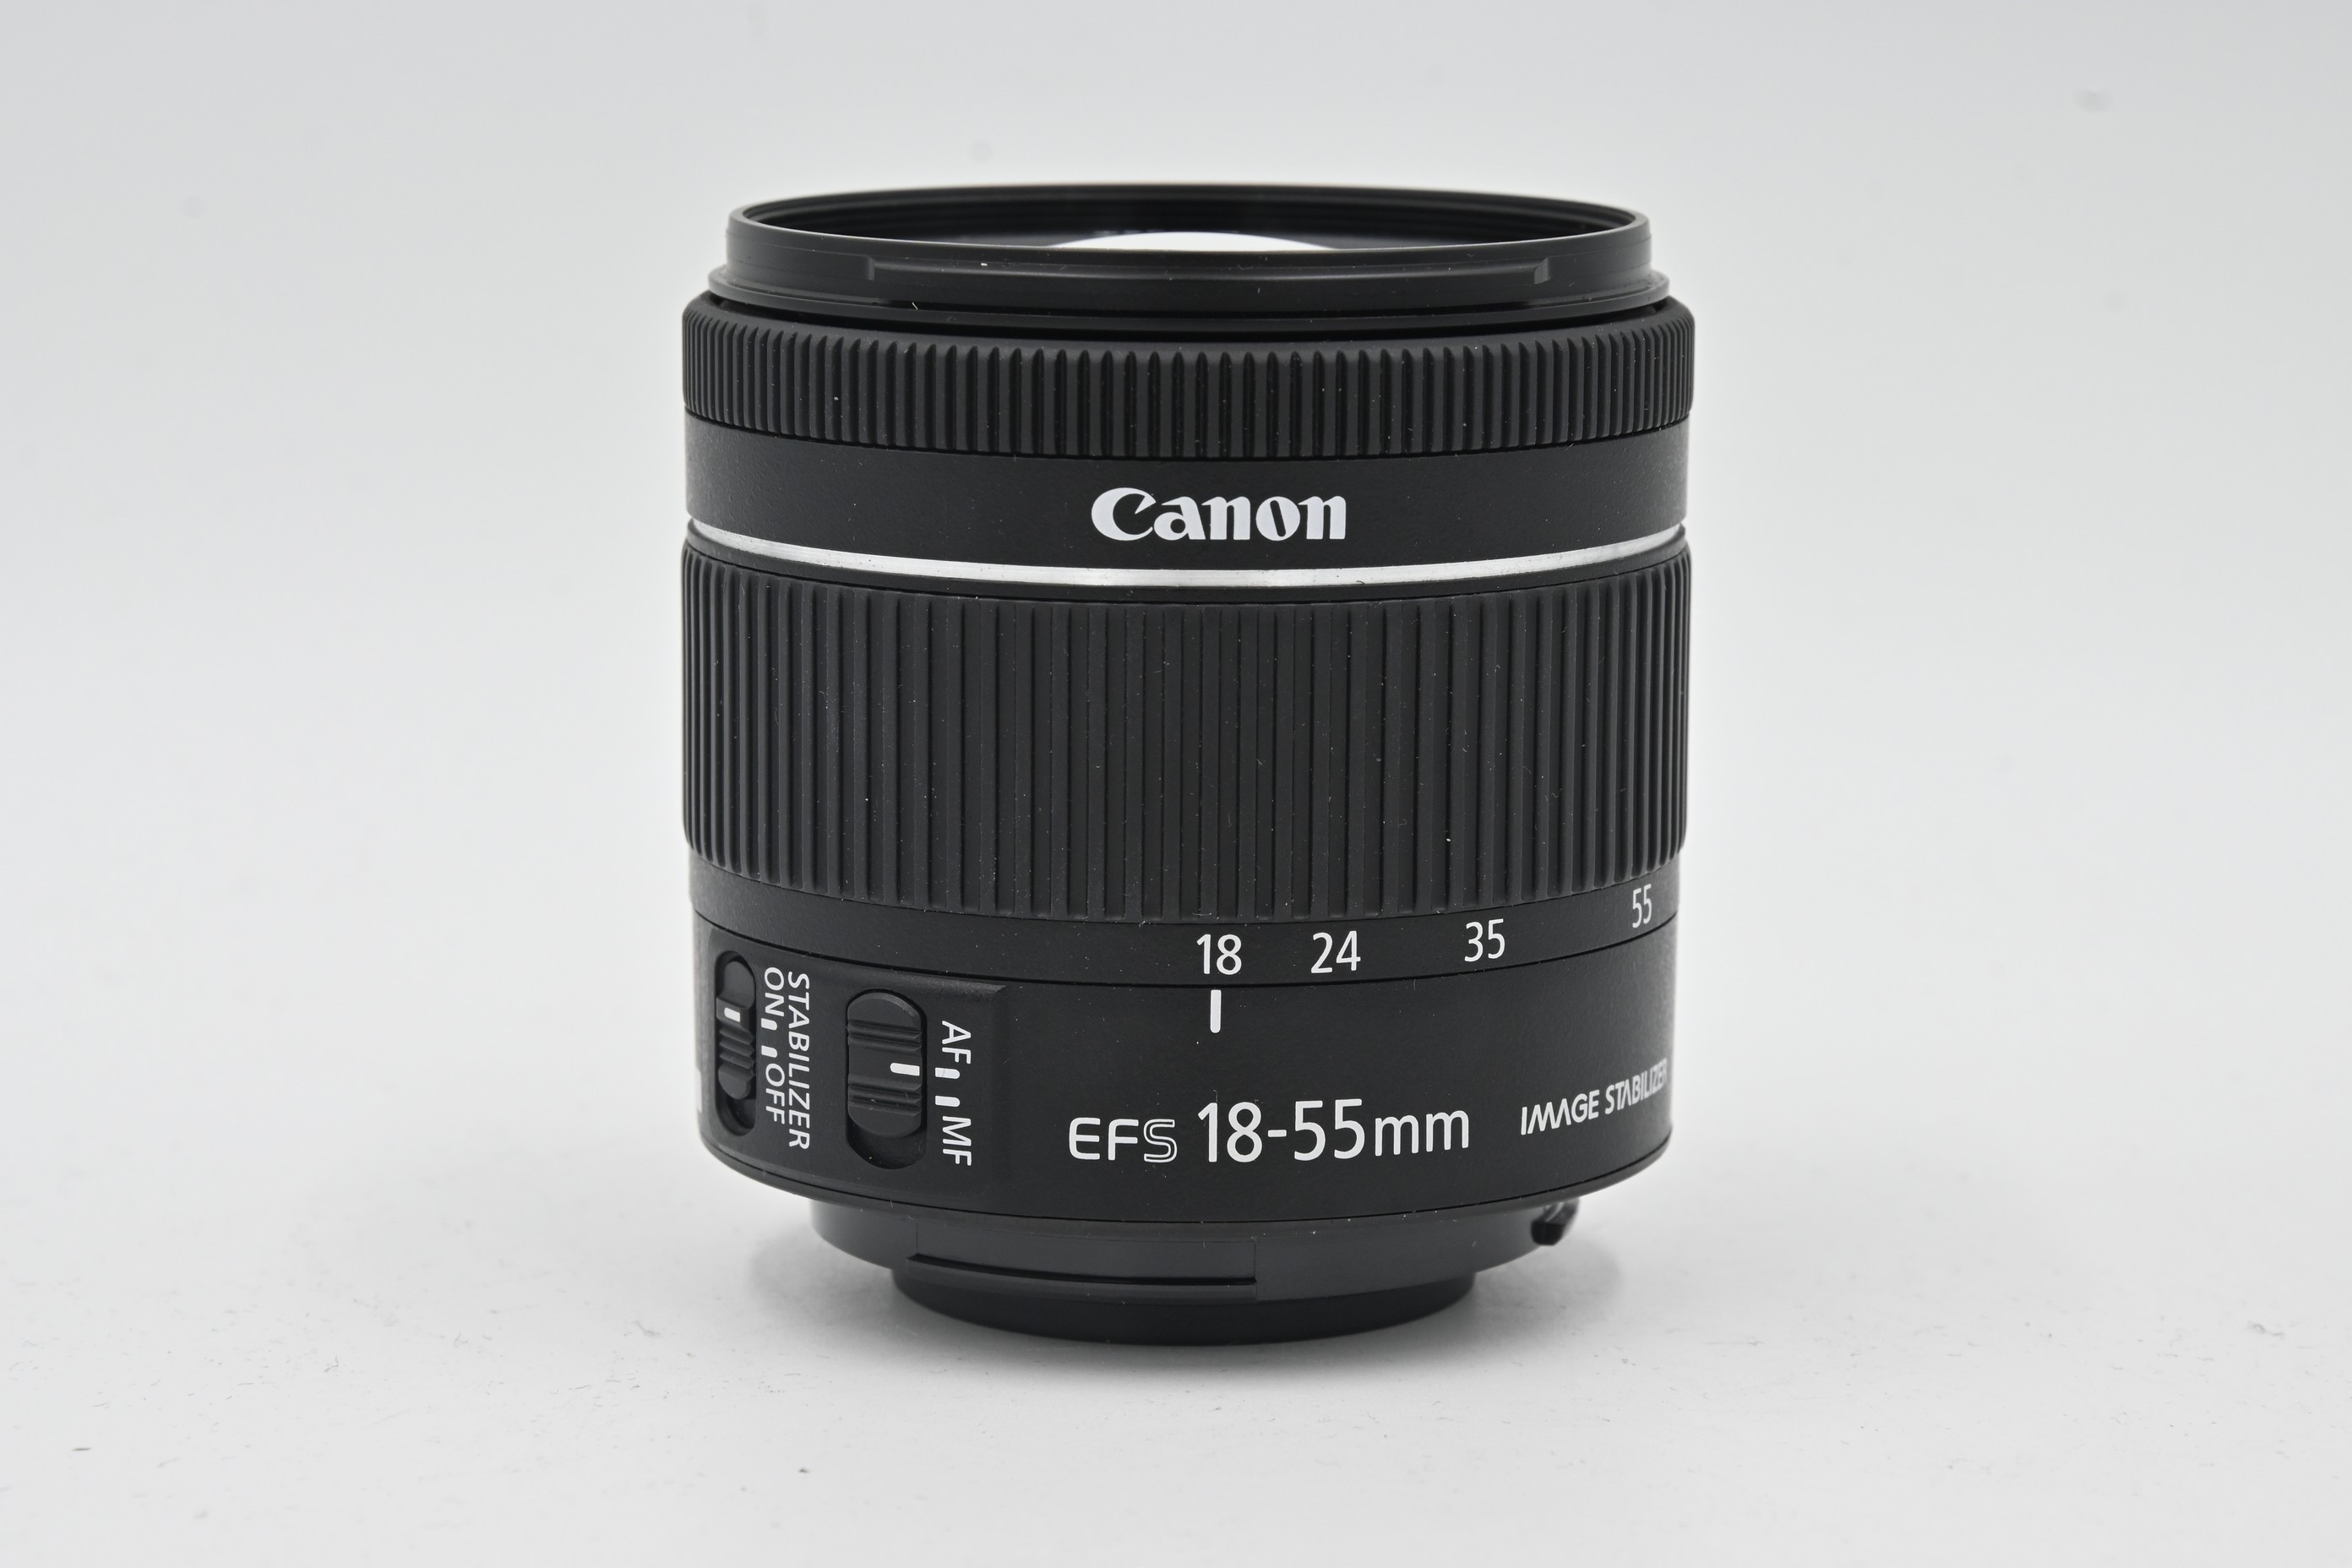  Canon EF-S 18-55mm f/4-5.6 IS STM ( 5)